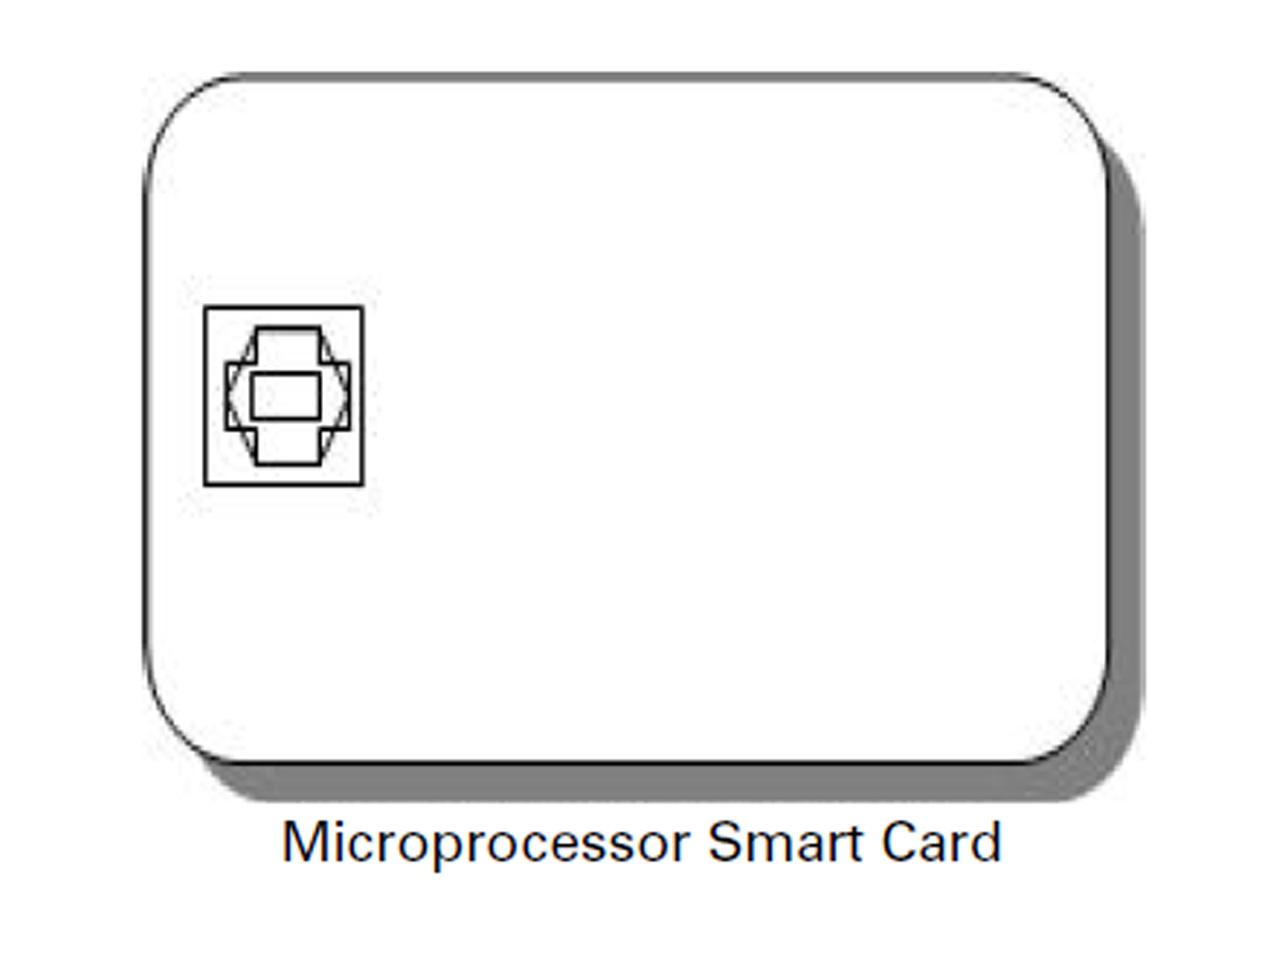 Drawing of a microprocessor smart card